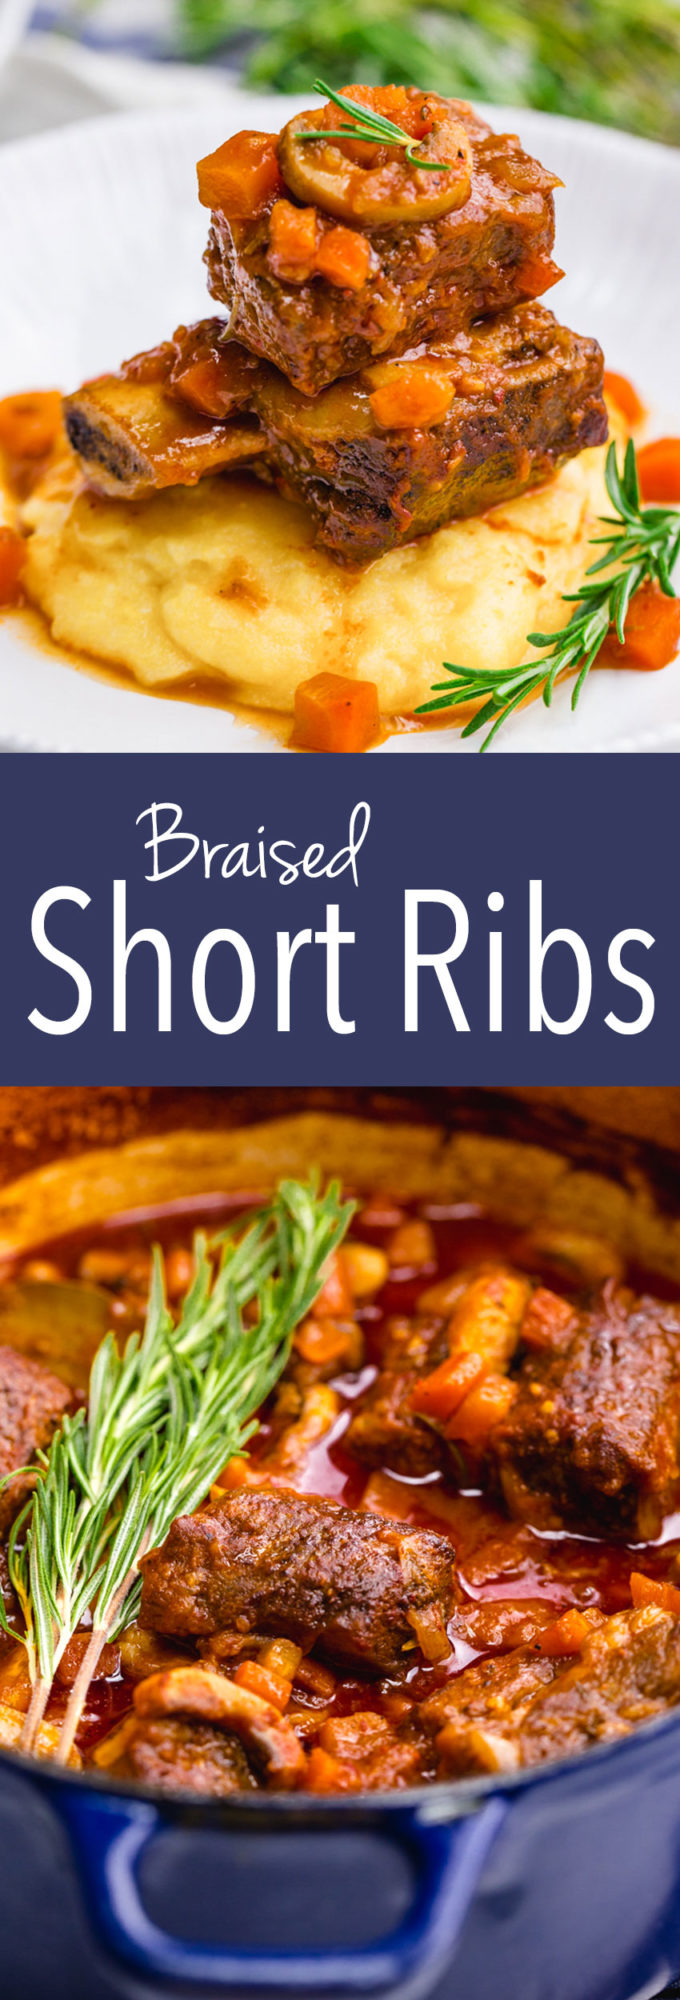 Braised Short Ribs: Deliciously braised in a tomato based sauce with veggies. 